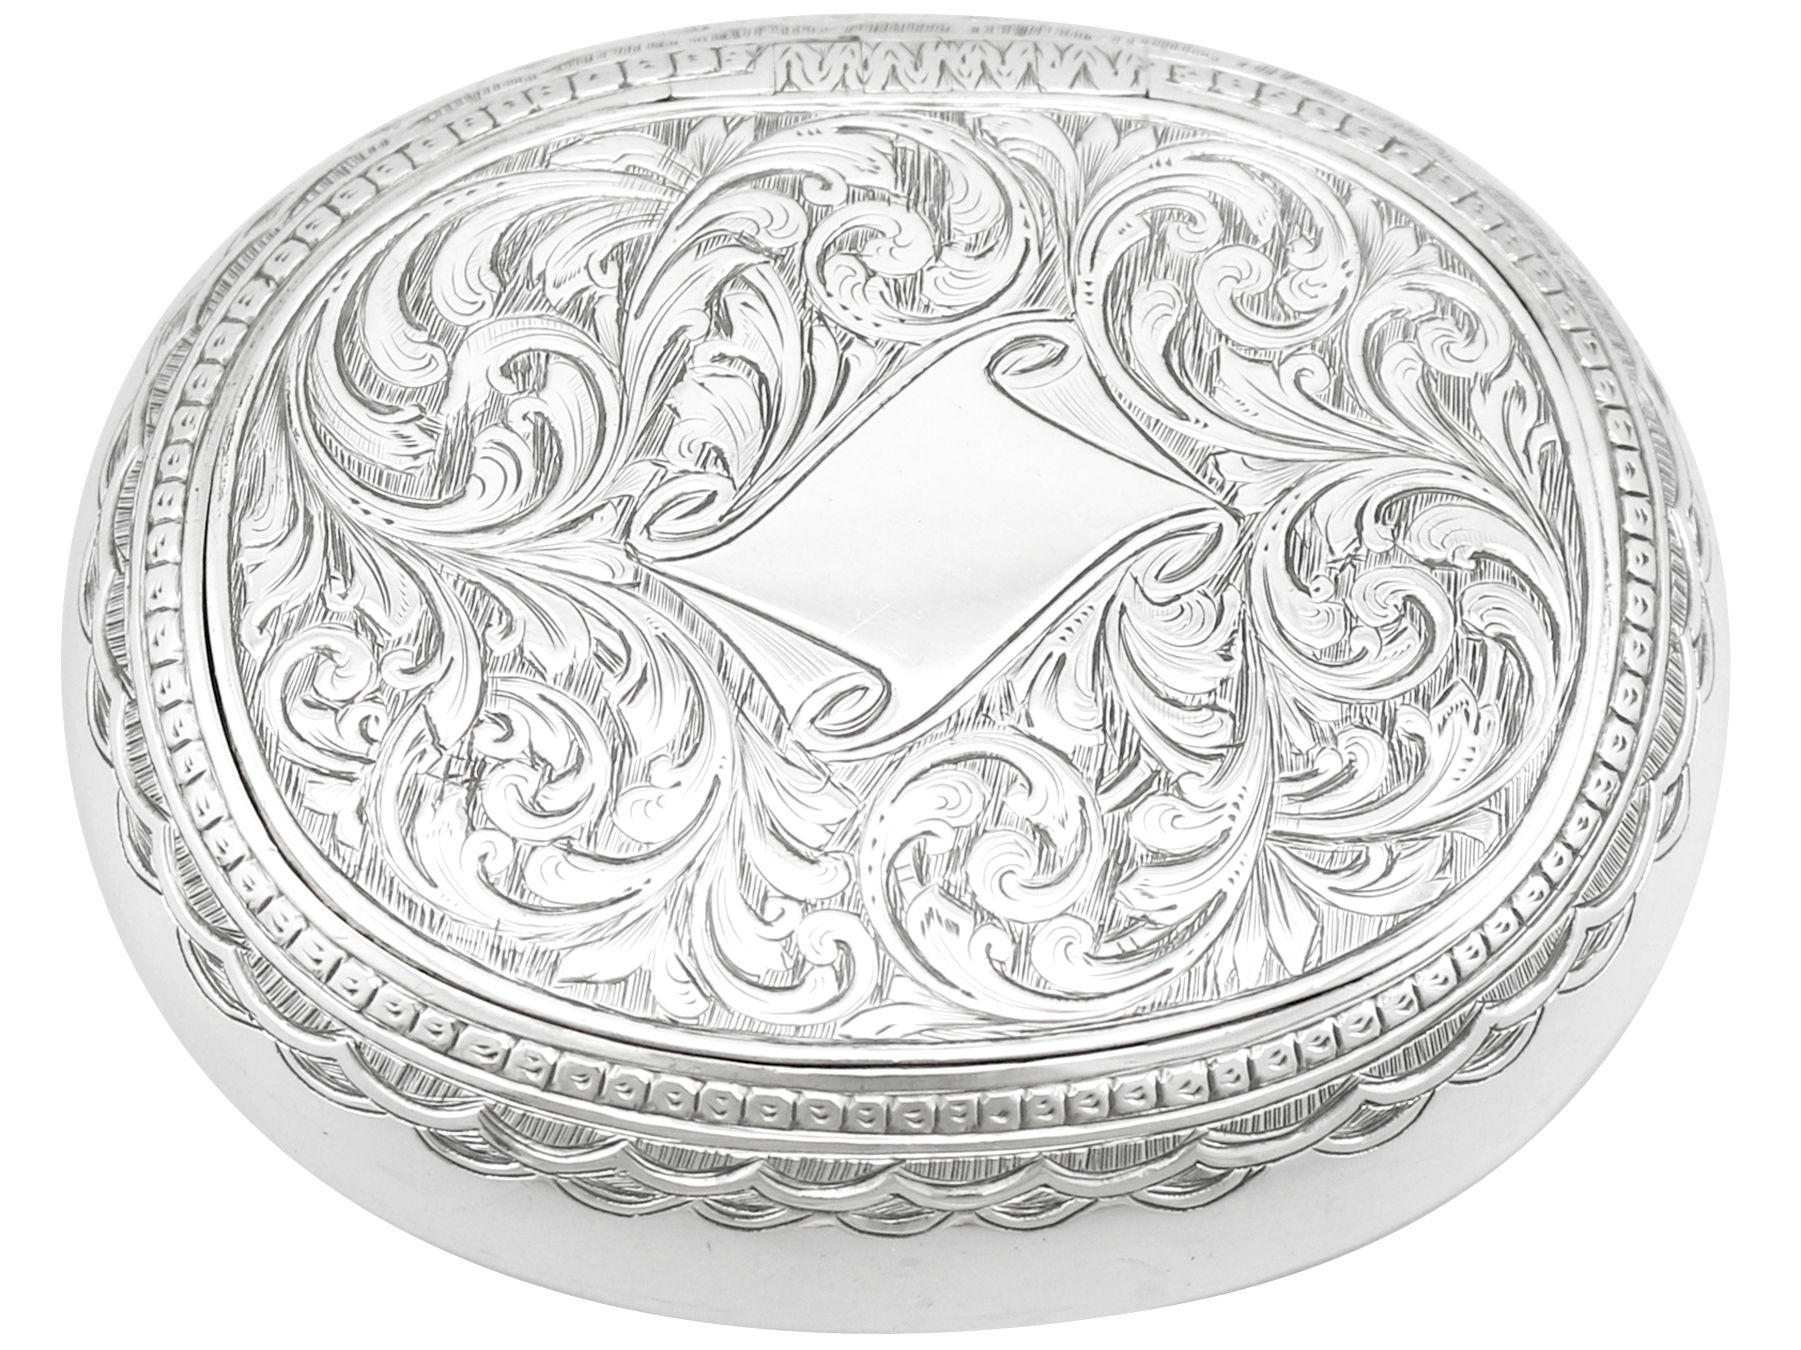 An exceptional, fine and impressive antique Victorian English sterling silver tobacco box; an addition to our smoking related silverware collection.

This exceptional antique Victorian sterling silver tobacco box has a plain oval rounded